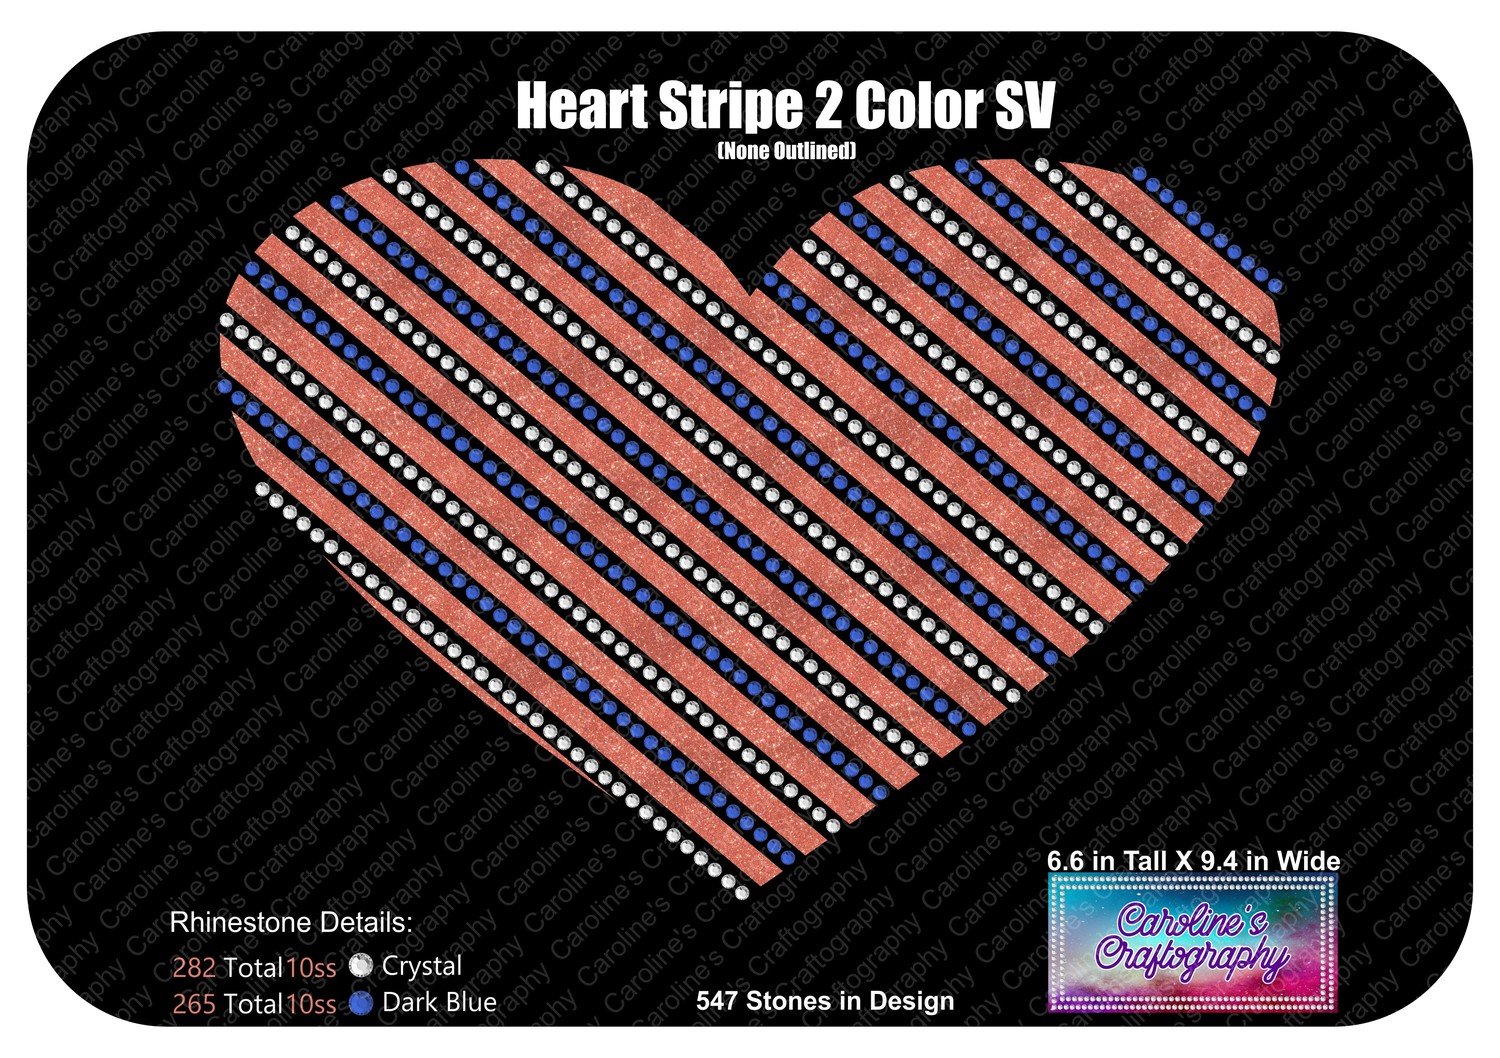 Heart Striped 2 Color Stone Vinyl (None Outlined)